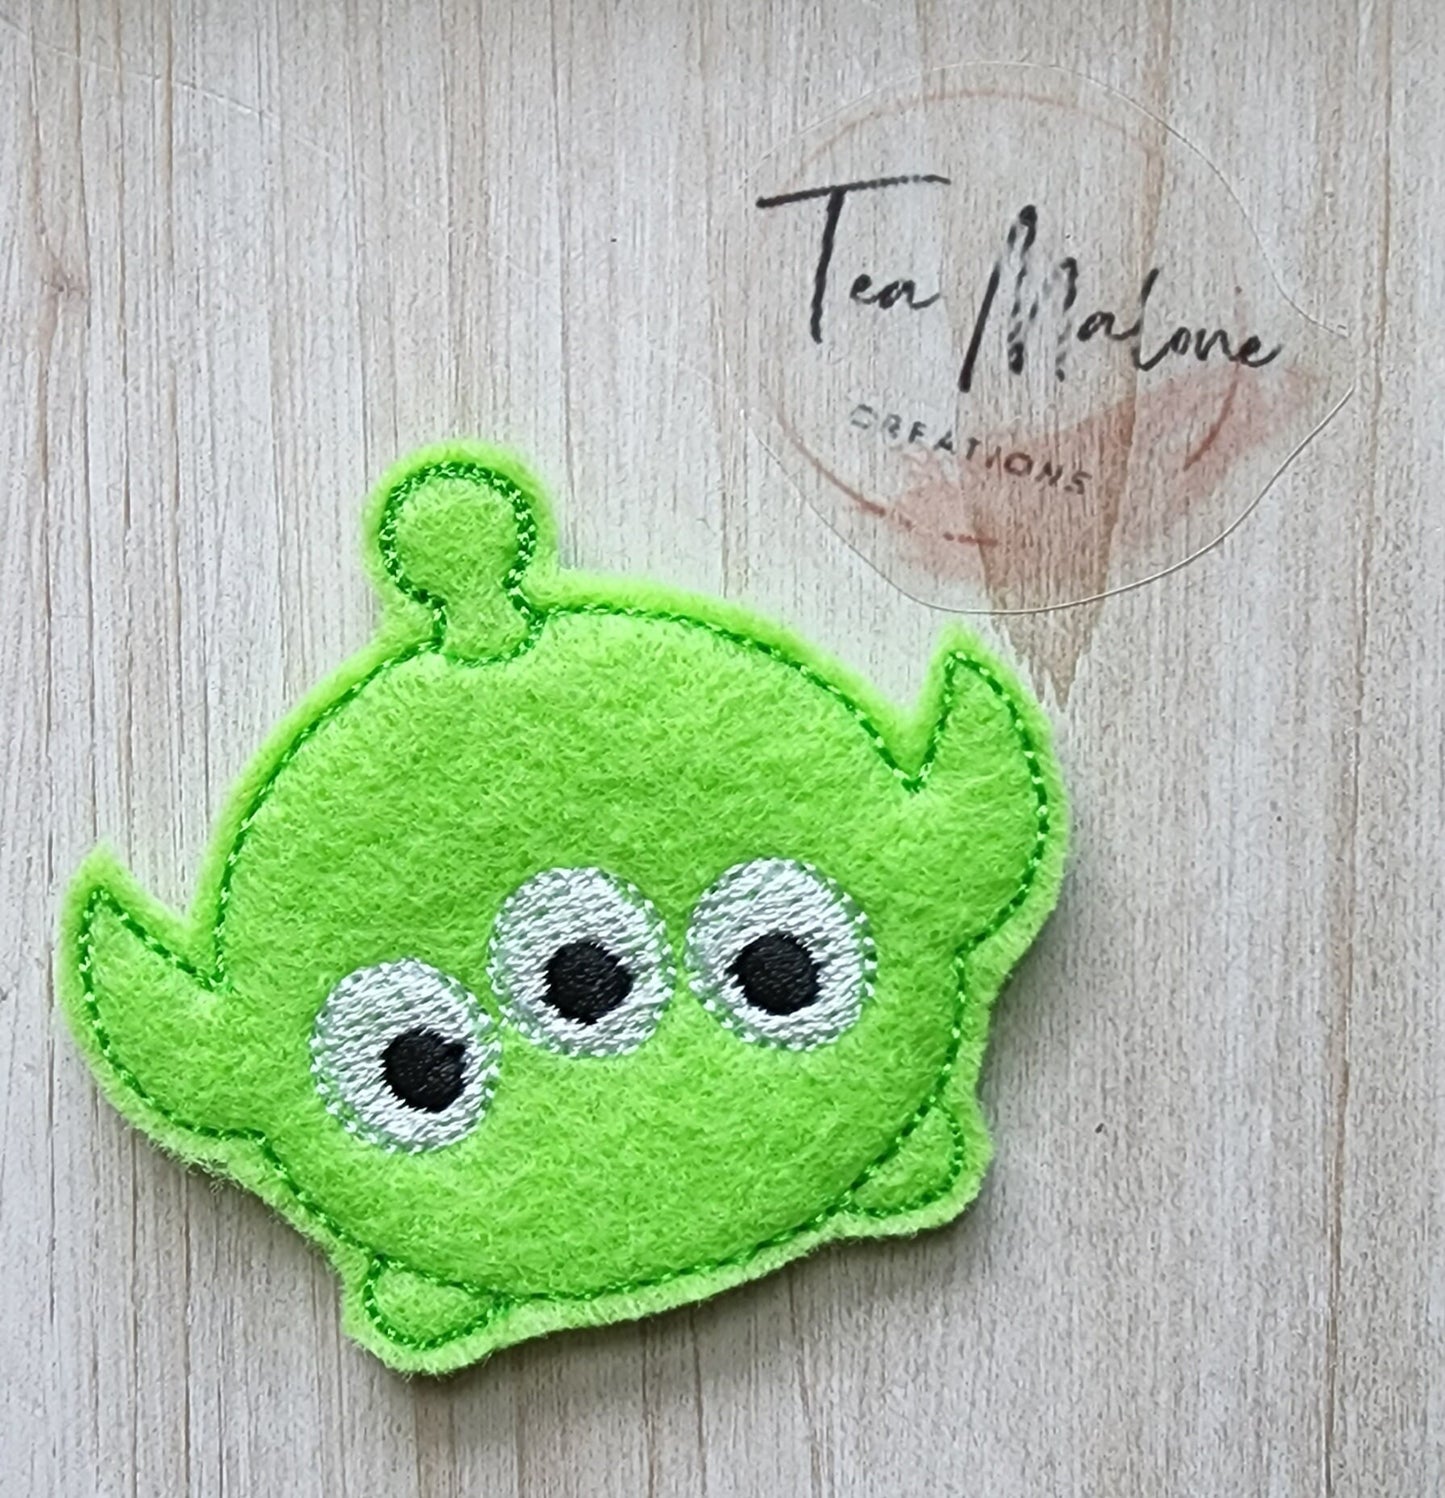 Toy Alien Embroidery Design